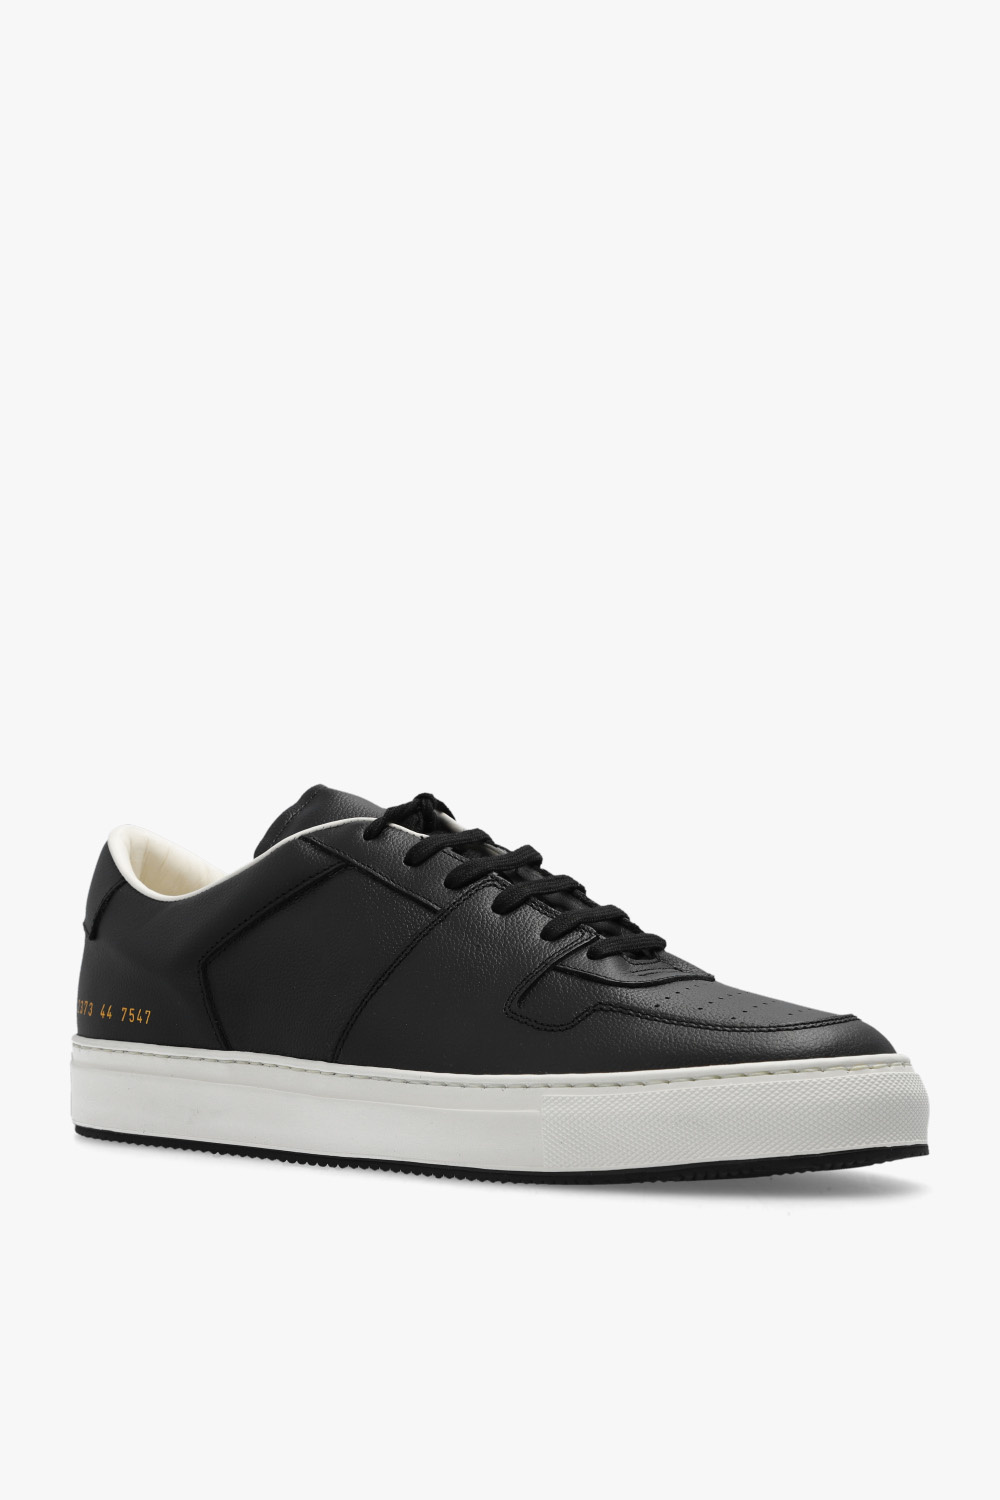 Common Projects ‘Decades’ sneakers